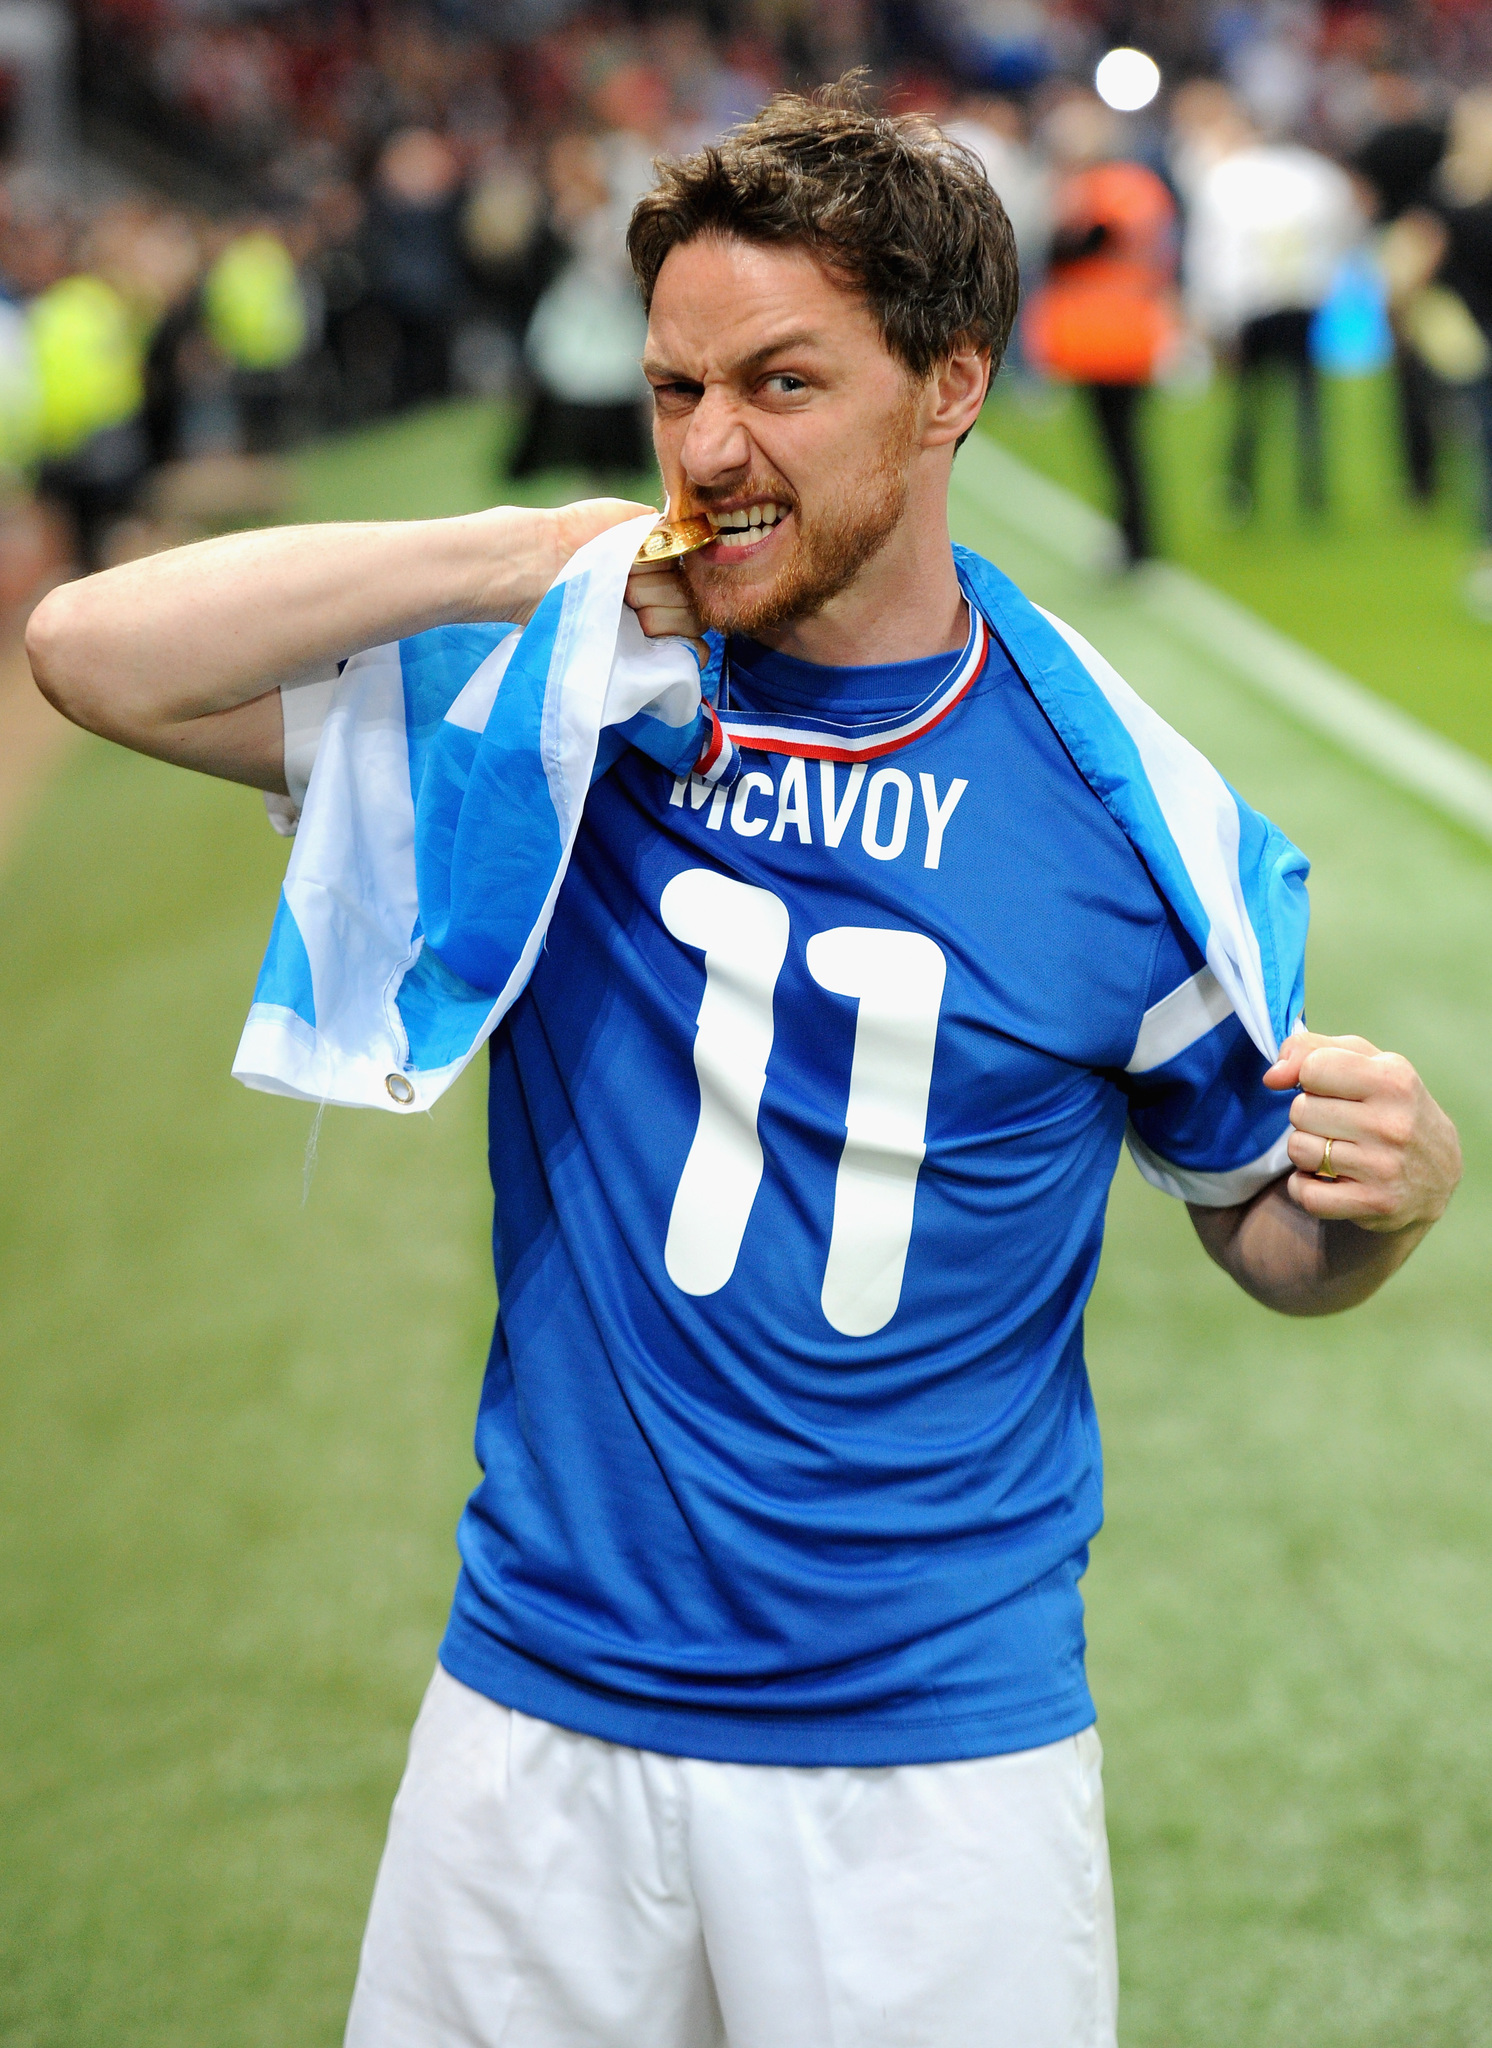 James McAvoy of the Rest of the World team celebrates victory in the Soccer Aid 2014 match at Old Trafford on June 8, 2014 in Manchester, England.